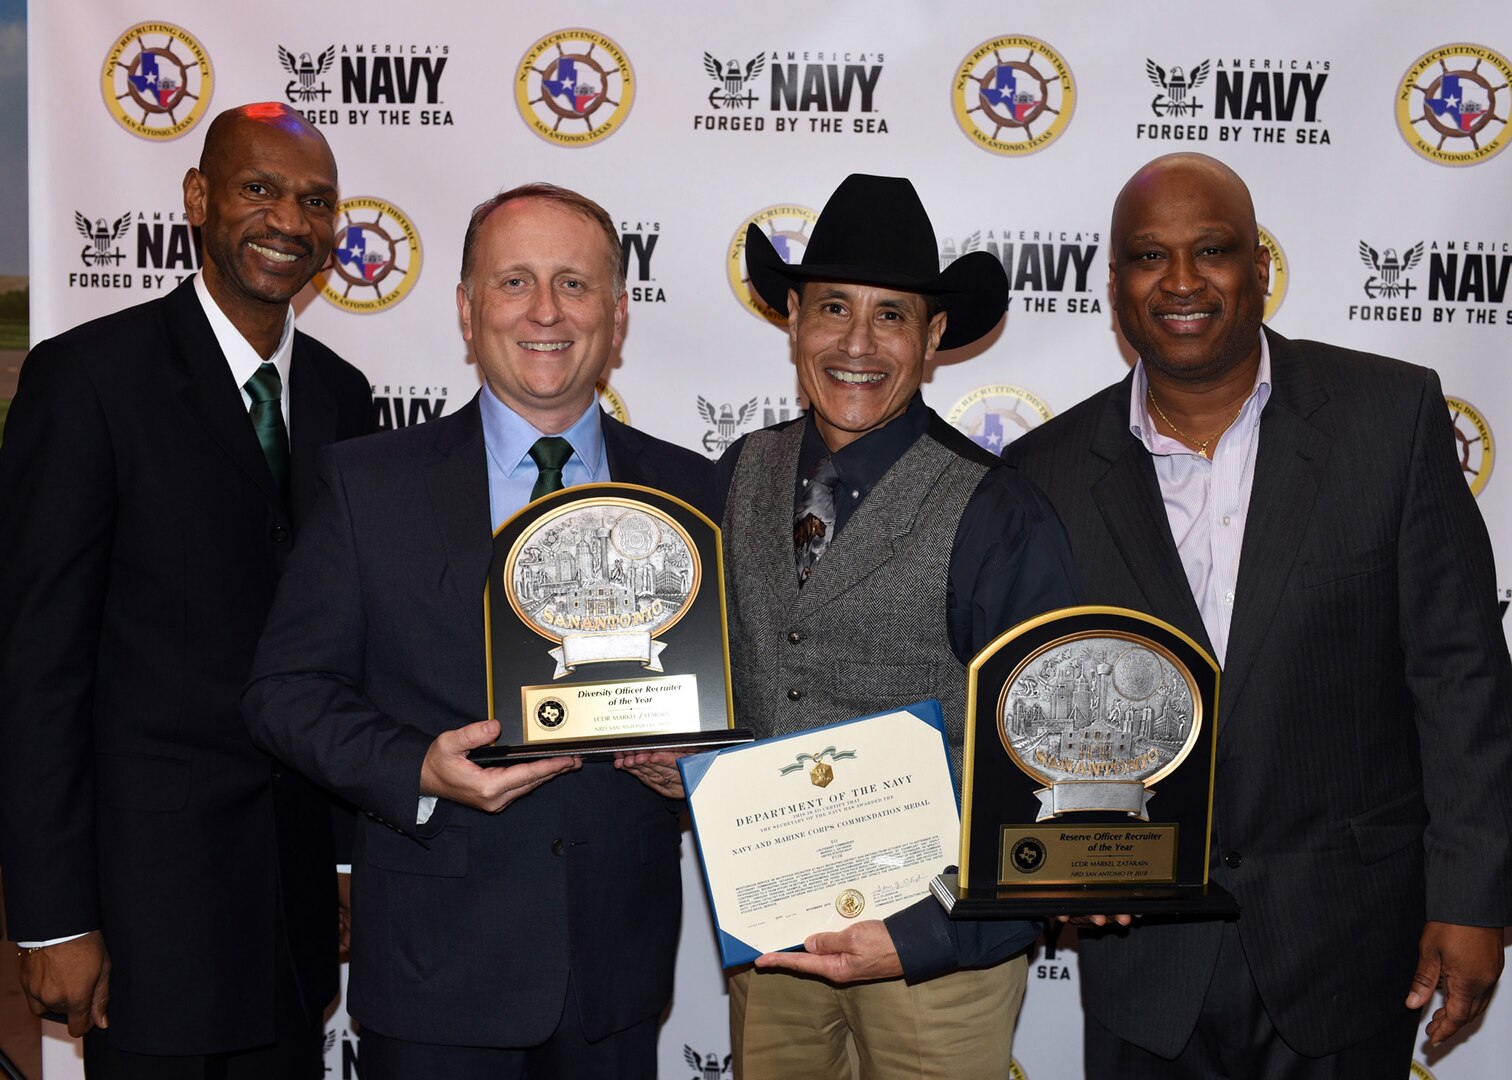 Lt. Cmdr. Markel Zatarain (third from left) of San Antonio, assigned to Navy Recruiting District (NRD) San Antonio, was recognized as the NRD’s 2018 Reserve Officer Recruiter and Diversity Officer Recruiter of the Year during an awards banquet held at the Hangar Hotel and Convention Center.  Presenting the awards were (from left) Command Master Chief Petty Officer Eric Mays, NRD Commanding Officer Cmdr. Jeffrey Reynolds, and Master Chief Petty Officer Matthew Maduemesi.